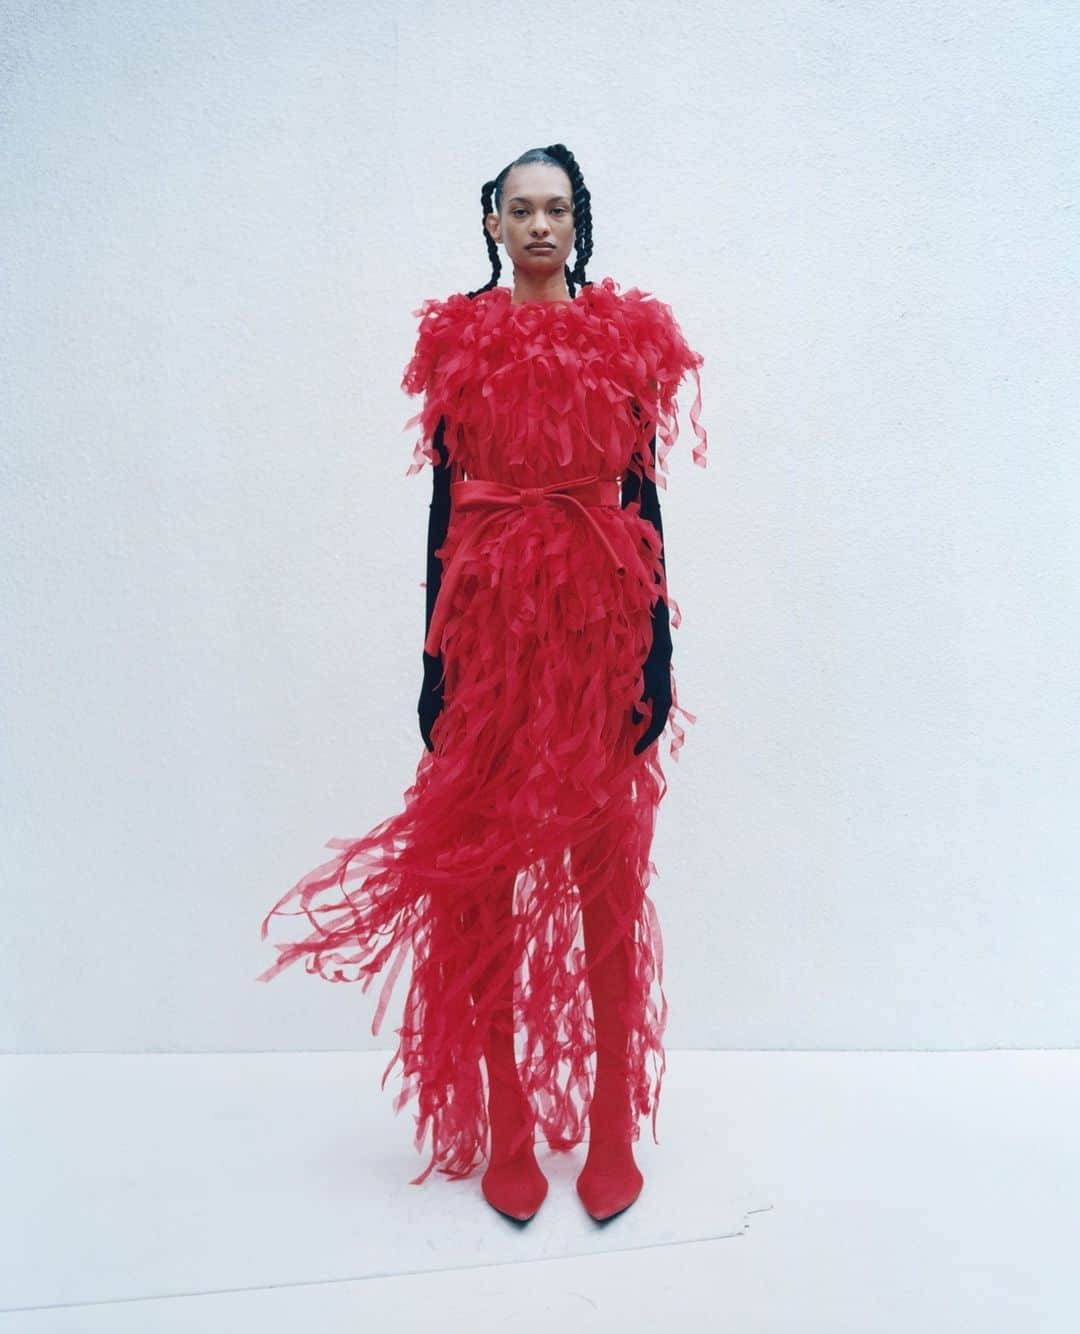 i-Dさんのインスタグラム写真 - (i-DInstagram)「Demna's latest @balenciaga couture collection continued exploring some of his perennial themes — razor-sharp nods to Cristóbal Balenciaga’s jutting volumes, floorsweeping gowns quivering with feathers, trompe l’oeil jeans a result of hand-painting, as well as windswept clothing moulded as if to defy gravity and archetypal black- tie and casual garments reimagined in dramatic volumes and elaborate textures.⁠ ⁠ “Making clothes is my armour,” he said after the show. “Cristóbal used to say his métier was his armour — and [clothes] are the place where I reconnect with myself.”⁠ ⁠ “How do you make couture modern?” one journalist asked, to which he replied: “You just saw.”⁠ ⁠ But really, the answer is more complex than the surface belies. “We have a tendency, especially working in this business, to always want to modernise things,” he reflects in a new interview with i-D. “Does it need modernising? If art could exist in the context of fashion, I think it would be couture.”⁠ ⁠ Hit the link in bio to read more from #Demna on Balenciaga's rebellion against 'luxury'.⁠ .⁠ .⁠ .⁠ Text @osman_ahmed_⁠ Photography @stef_mitchell⁠ Fashion @sydneyrosethomas⁠ Hair @akemi_kishida at MA+⁠ Make-up @karinwesterlundd at Streeters⁠ Set Design Anne Aubert⁠ Casting Gabrielle Lawrence at @peoplefile⁠ Models Anne Kroon at Known, Sweia Hartmann, Mami Akol and Ash Rouault at Select, Deborah Akanni at Oui, Mortiz Wöhlbier, Seng Khan at Women, Kamil Sznajder at Aquamarine, Piotr Szatan at The Squad, Guo Jike at RockMen, Maguatte Thiam at Studio, Amance Bastard, Arthur Del Beato at Milk, Quadri Olajuwon at Xdirectn and Anton Grebentsov⁠ All clothing and accessories #Balenciaga #Couture」11月17日 2時45分 - i_d